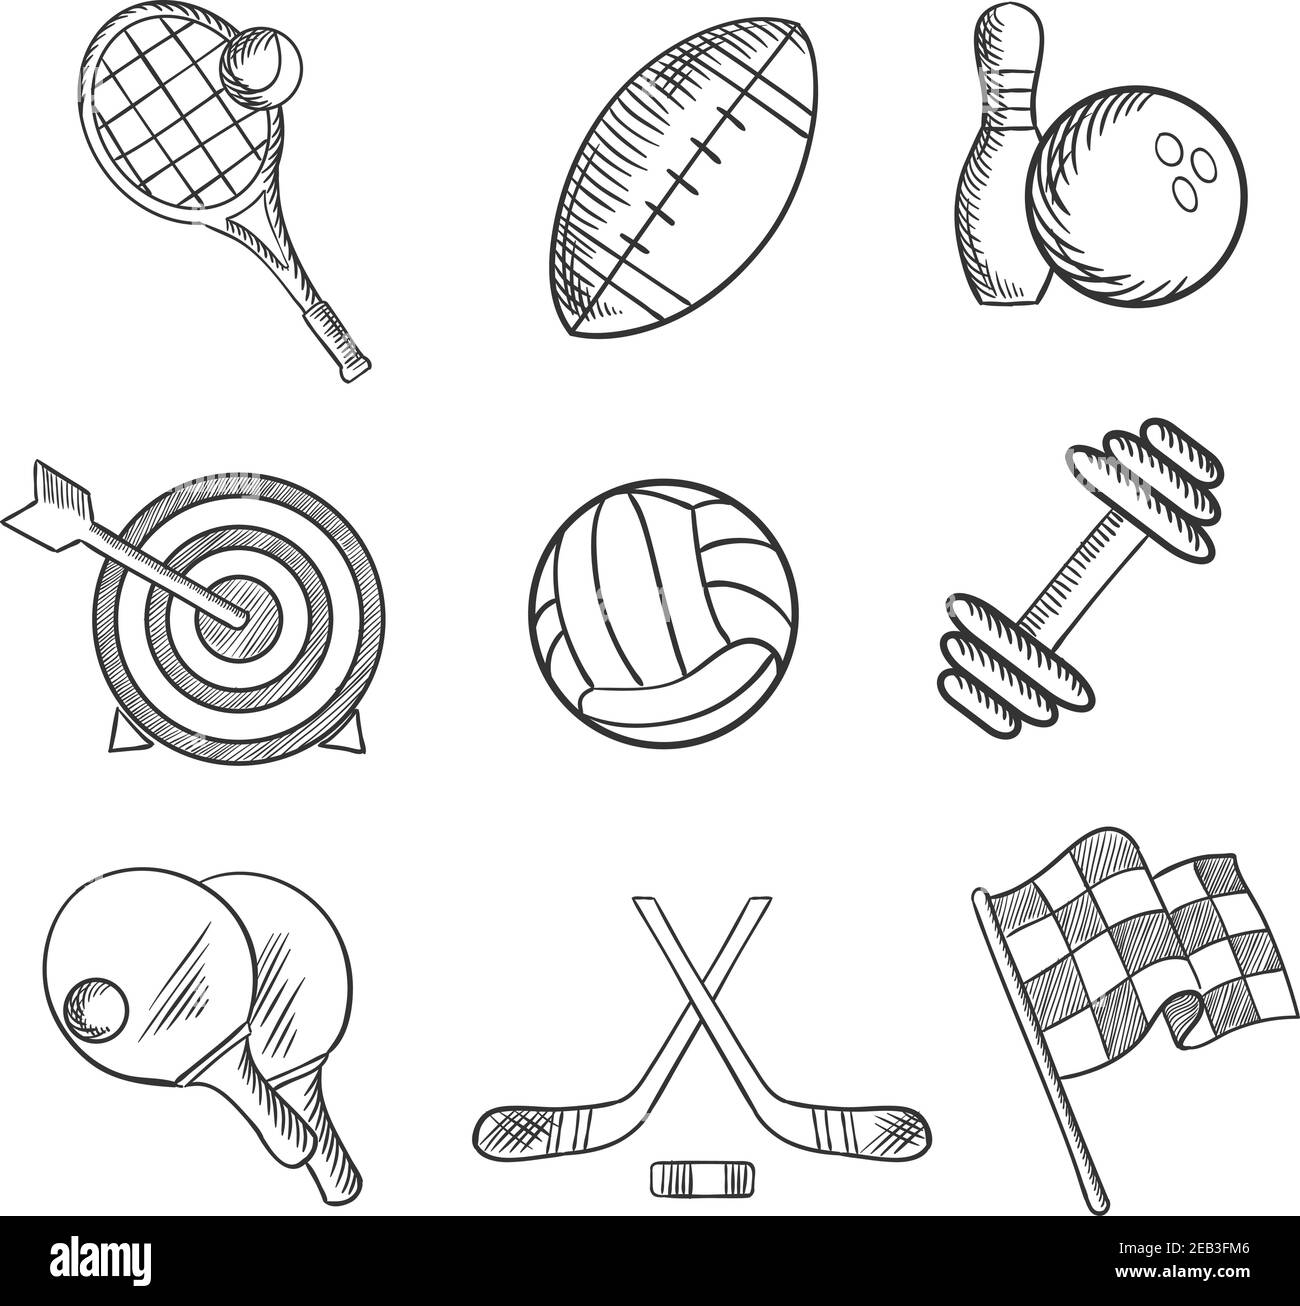 Sport icons with tennis, football, bowling, archery, hockey, motor racing, weight lifting, table tennis rugby and volleyball items. Sketch style Stock Vector